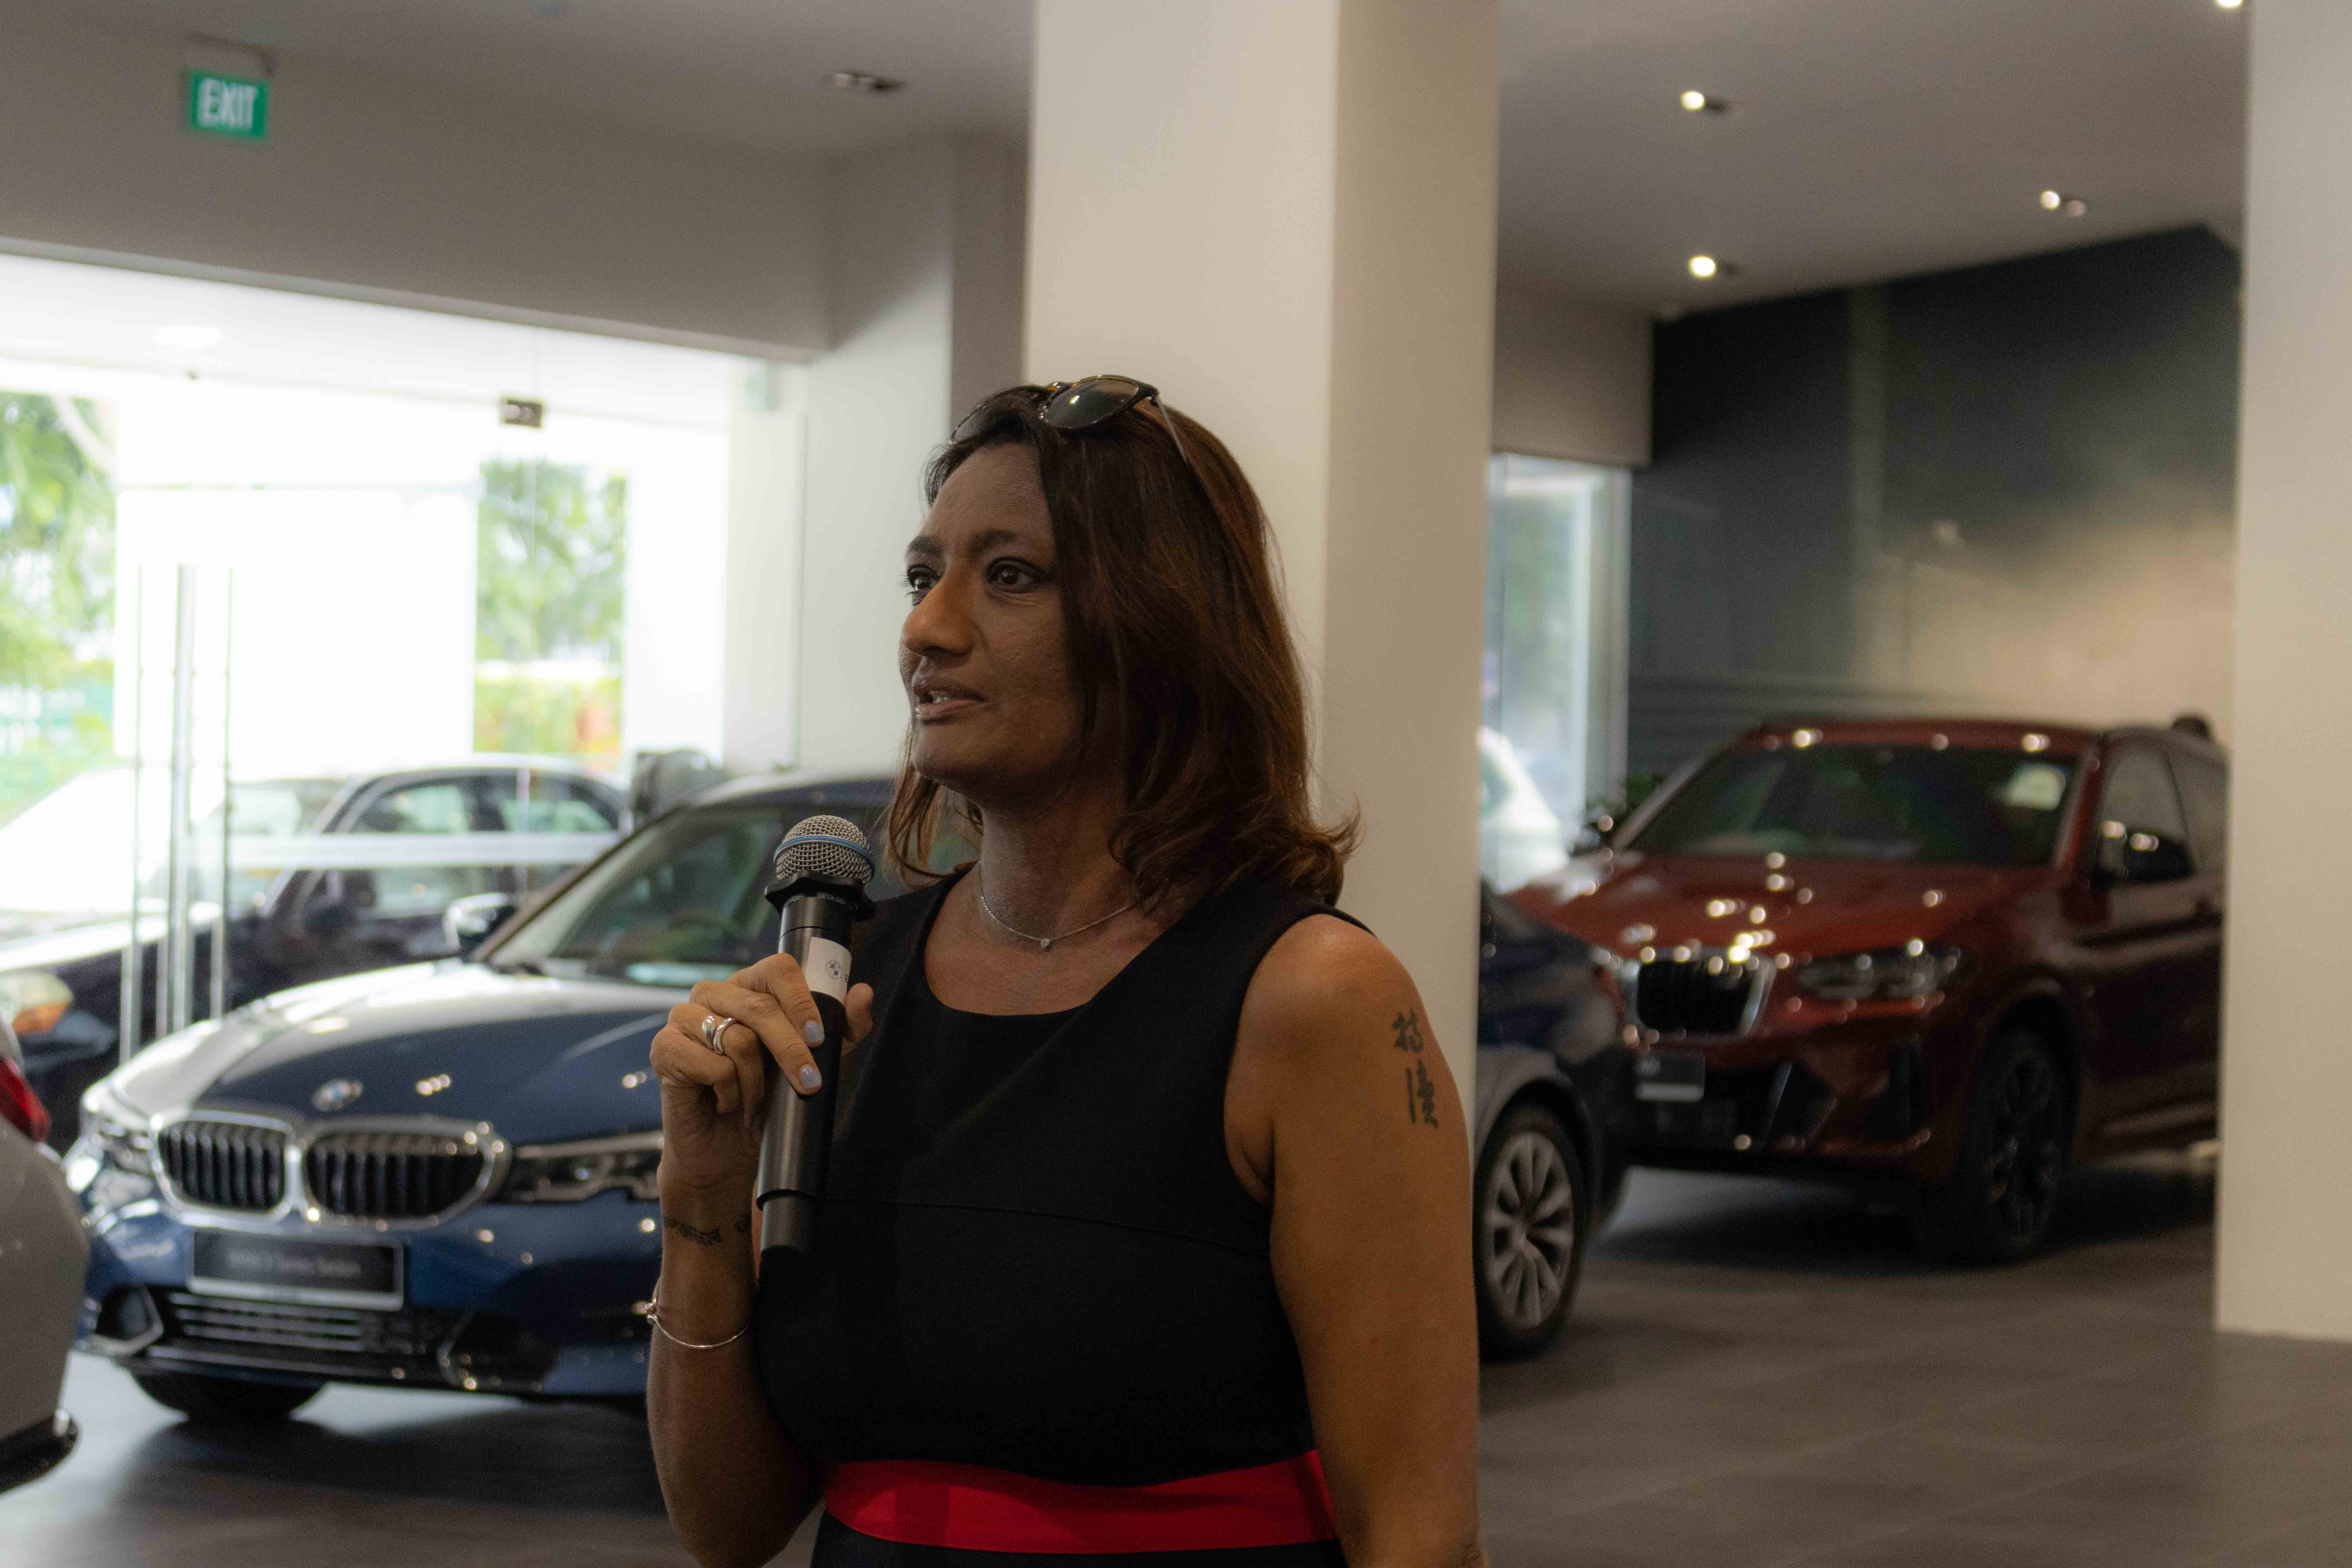 Director of Corporate Affairs and Sustainability of BMW Group Asia - says we can now go and eat